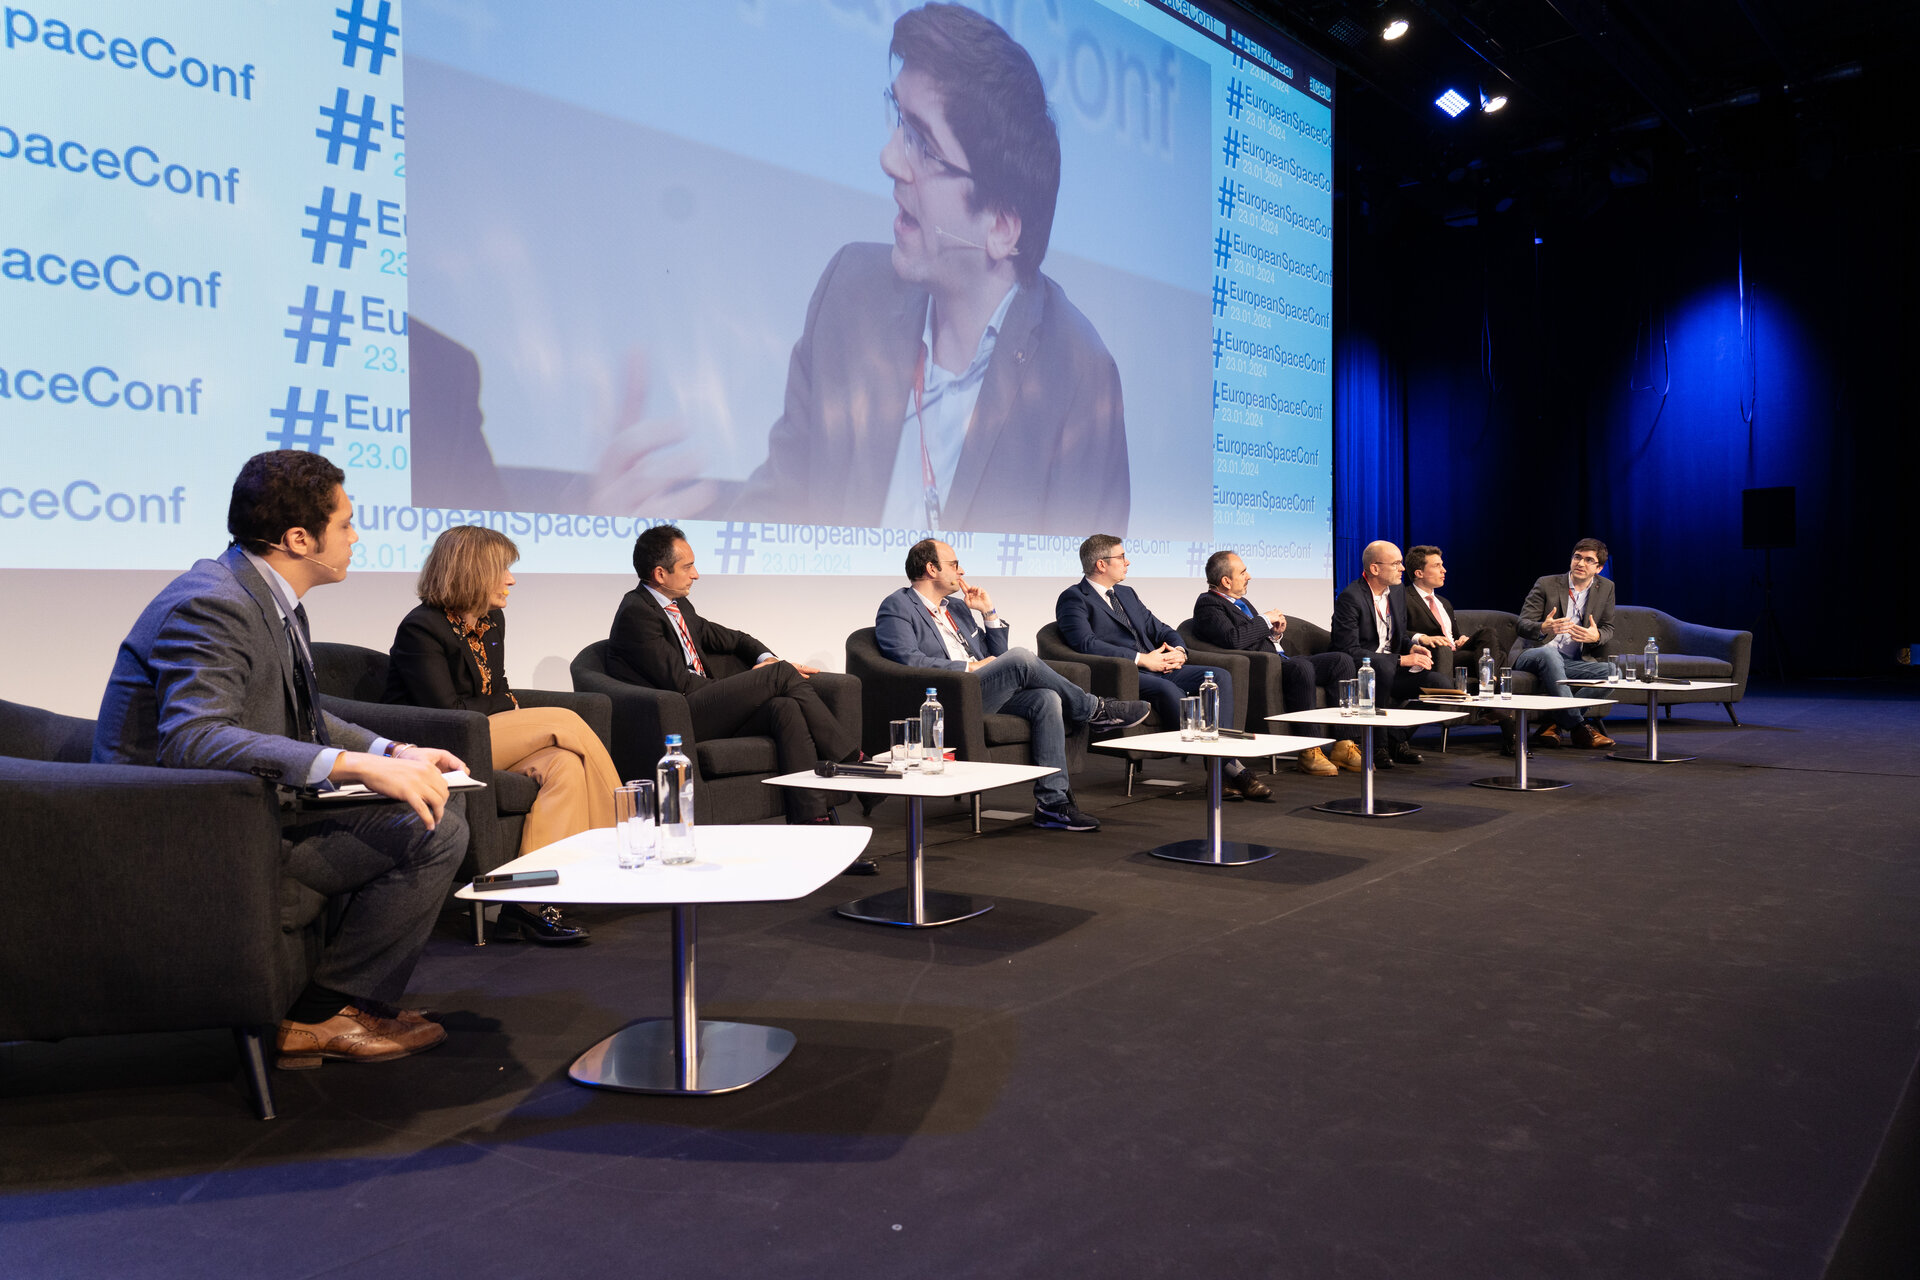 Panel members during the session "Space Commercialisation: Empowering a competitive European space ecosystem".